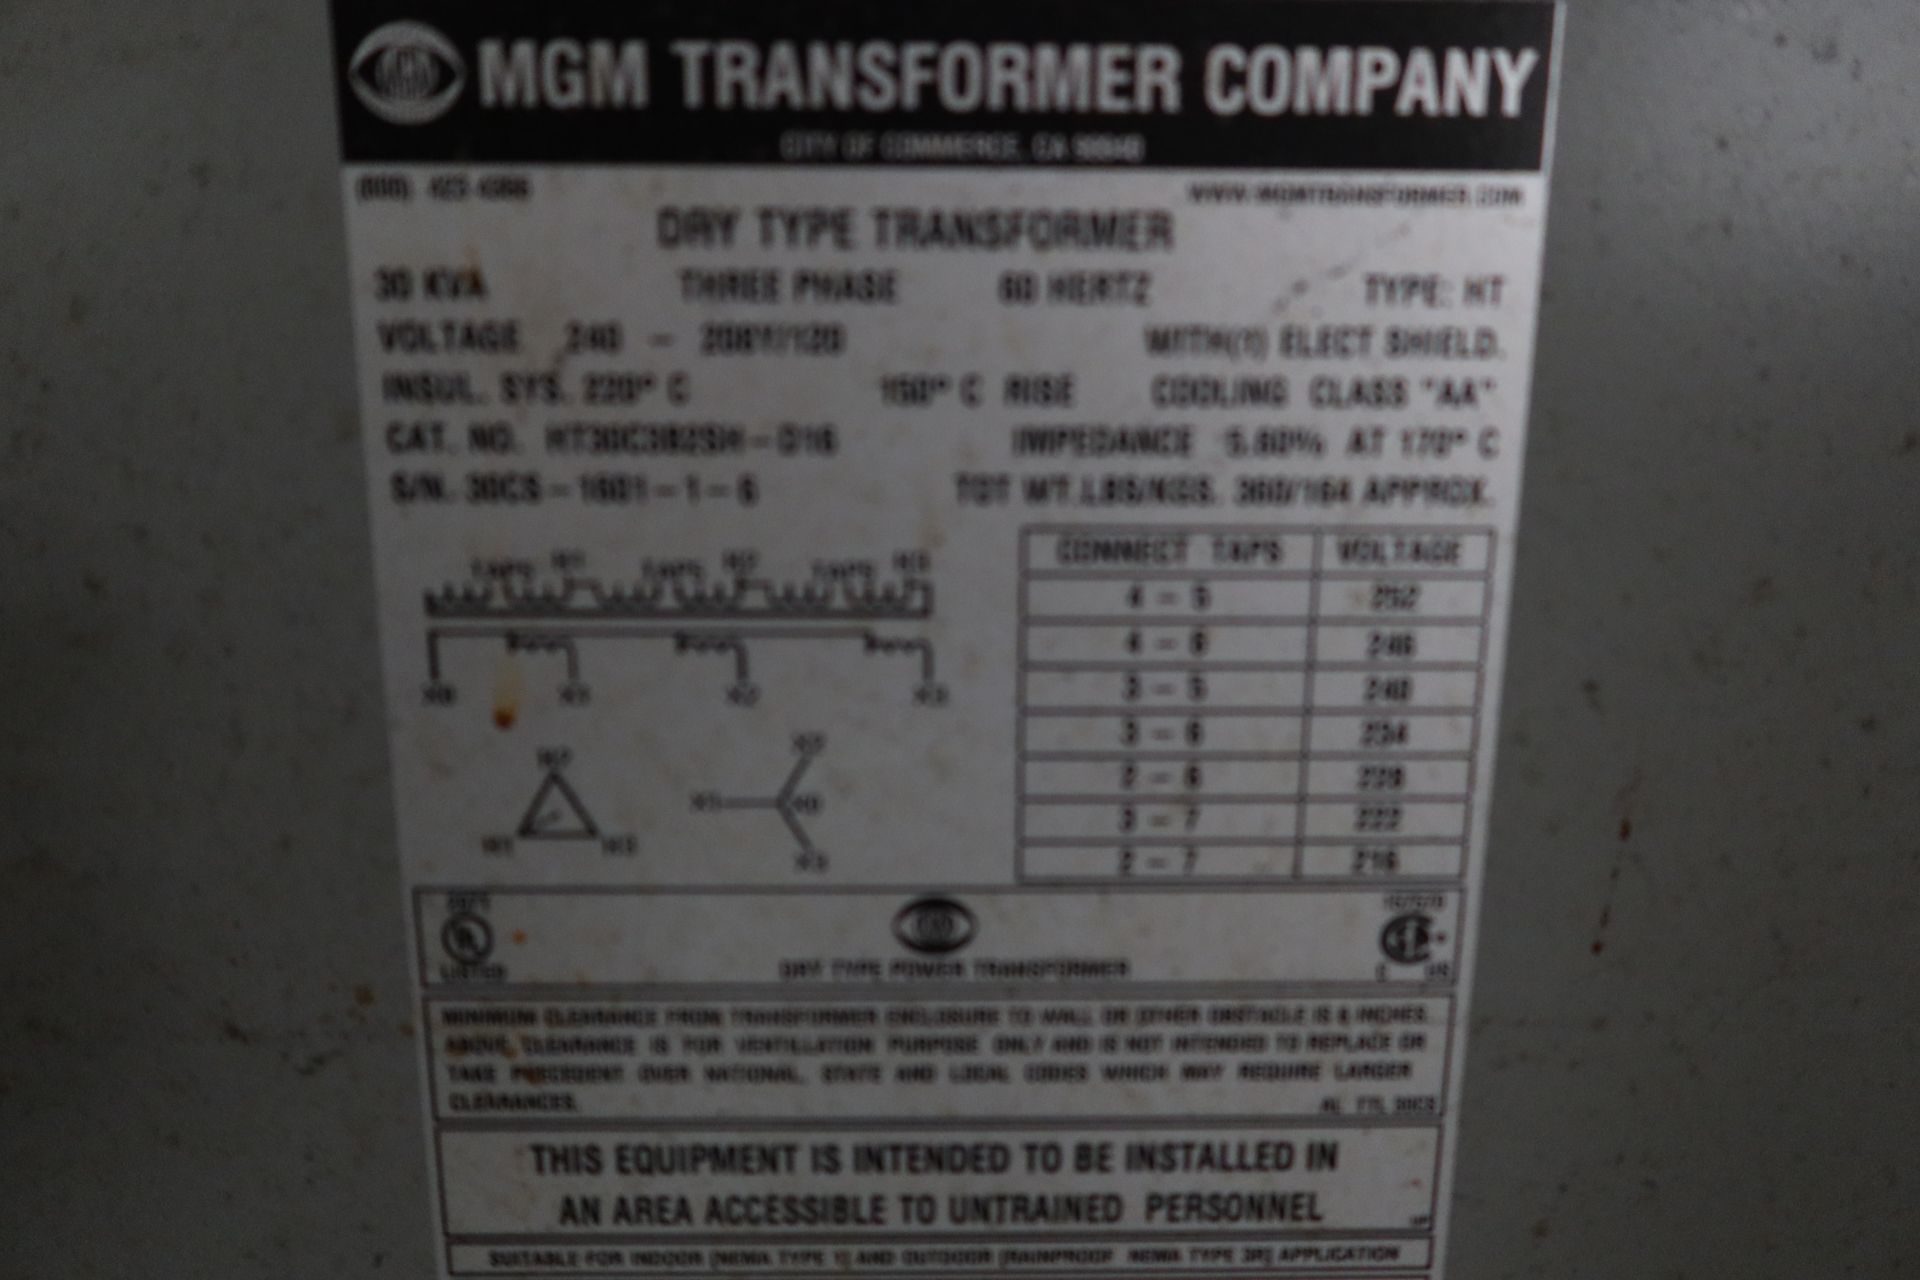 MGM DRYTYPE TRANSFORMER, 30KVA, 3PH, 240 - 208Y/120 (TRANSFORMERS CAN NOT BE DISCONNECTED OR REMOV - Image 2 of 2